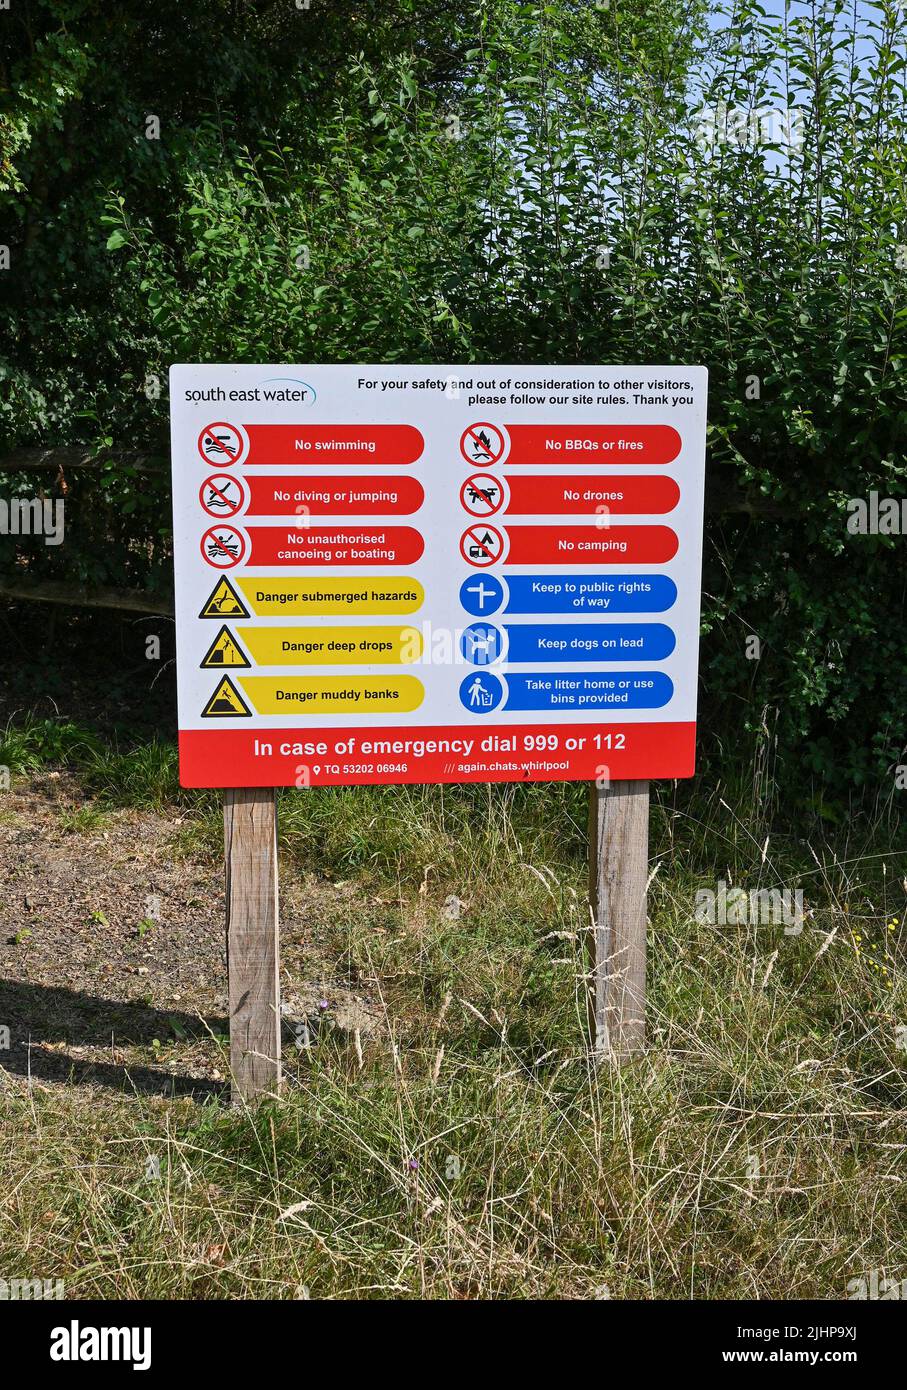 Arlington Reservoir near Lewes in East Sussex , England UK - South East Water sign warning people not to swim use drones light BBQs ( Barbecues) no camping no jumping into water and various safety measure Stock Photo